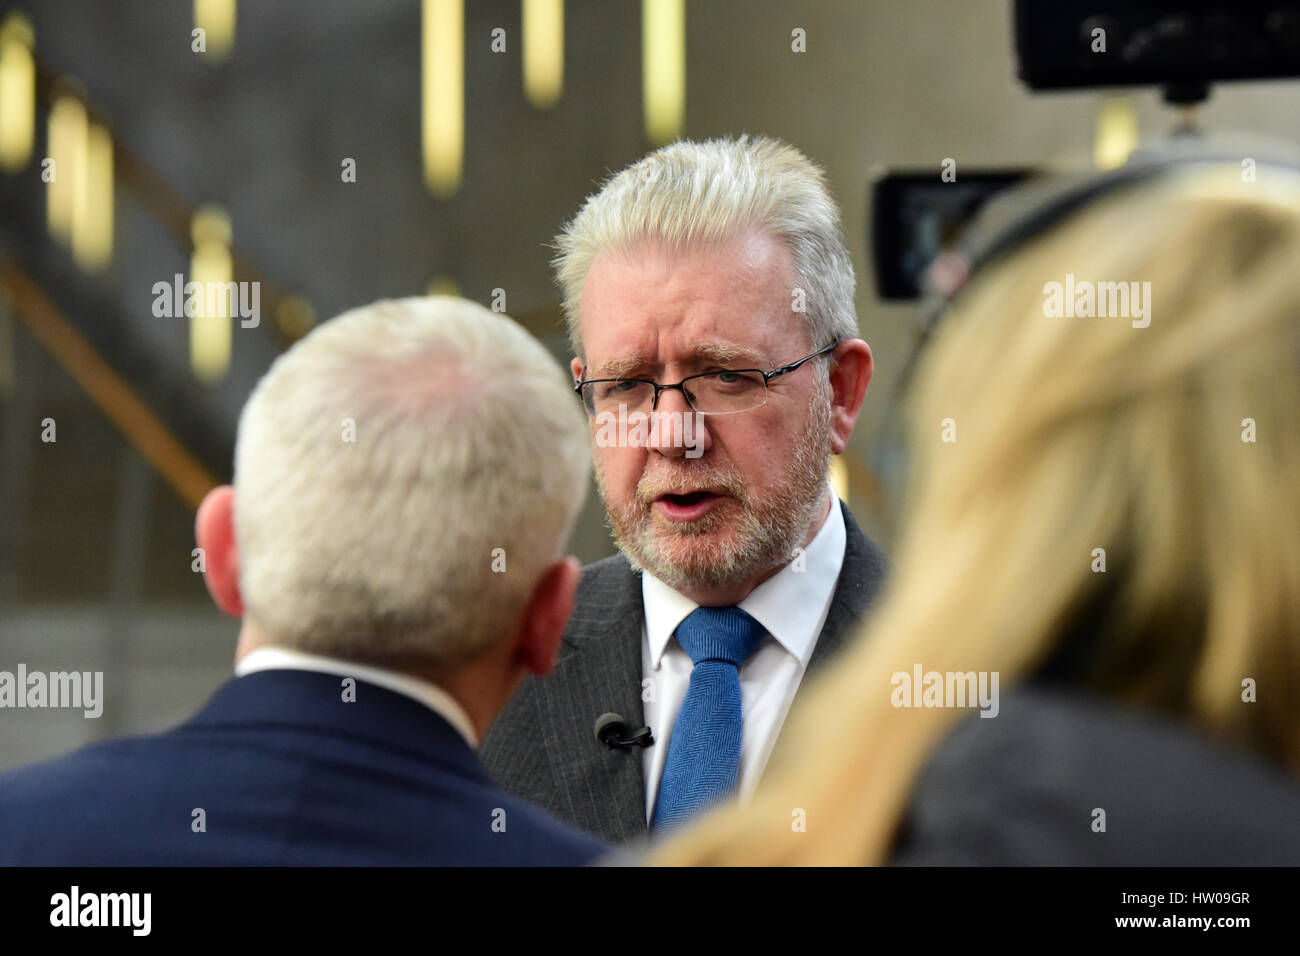 Edinburgh, Scotland, UK. 14th March 2017. Scottish Brexit minister Michael Russell gives an interview in the Scottish Parliament on the day after First Minister Nicola Sturgeon announced she will seek approval to hold another referendum on Scottish independence, citing the UK Government's supposed reluctance to make a separate case for Scotland in Brexit negotiations, Credit: Ken Jack/Alamy Live News Stock Photo